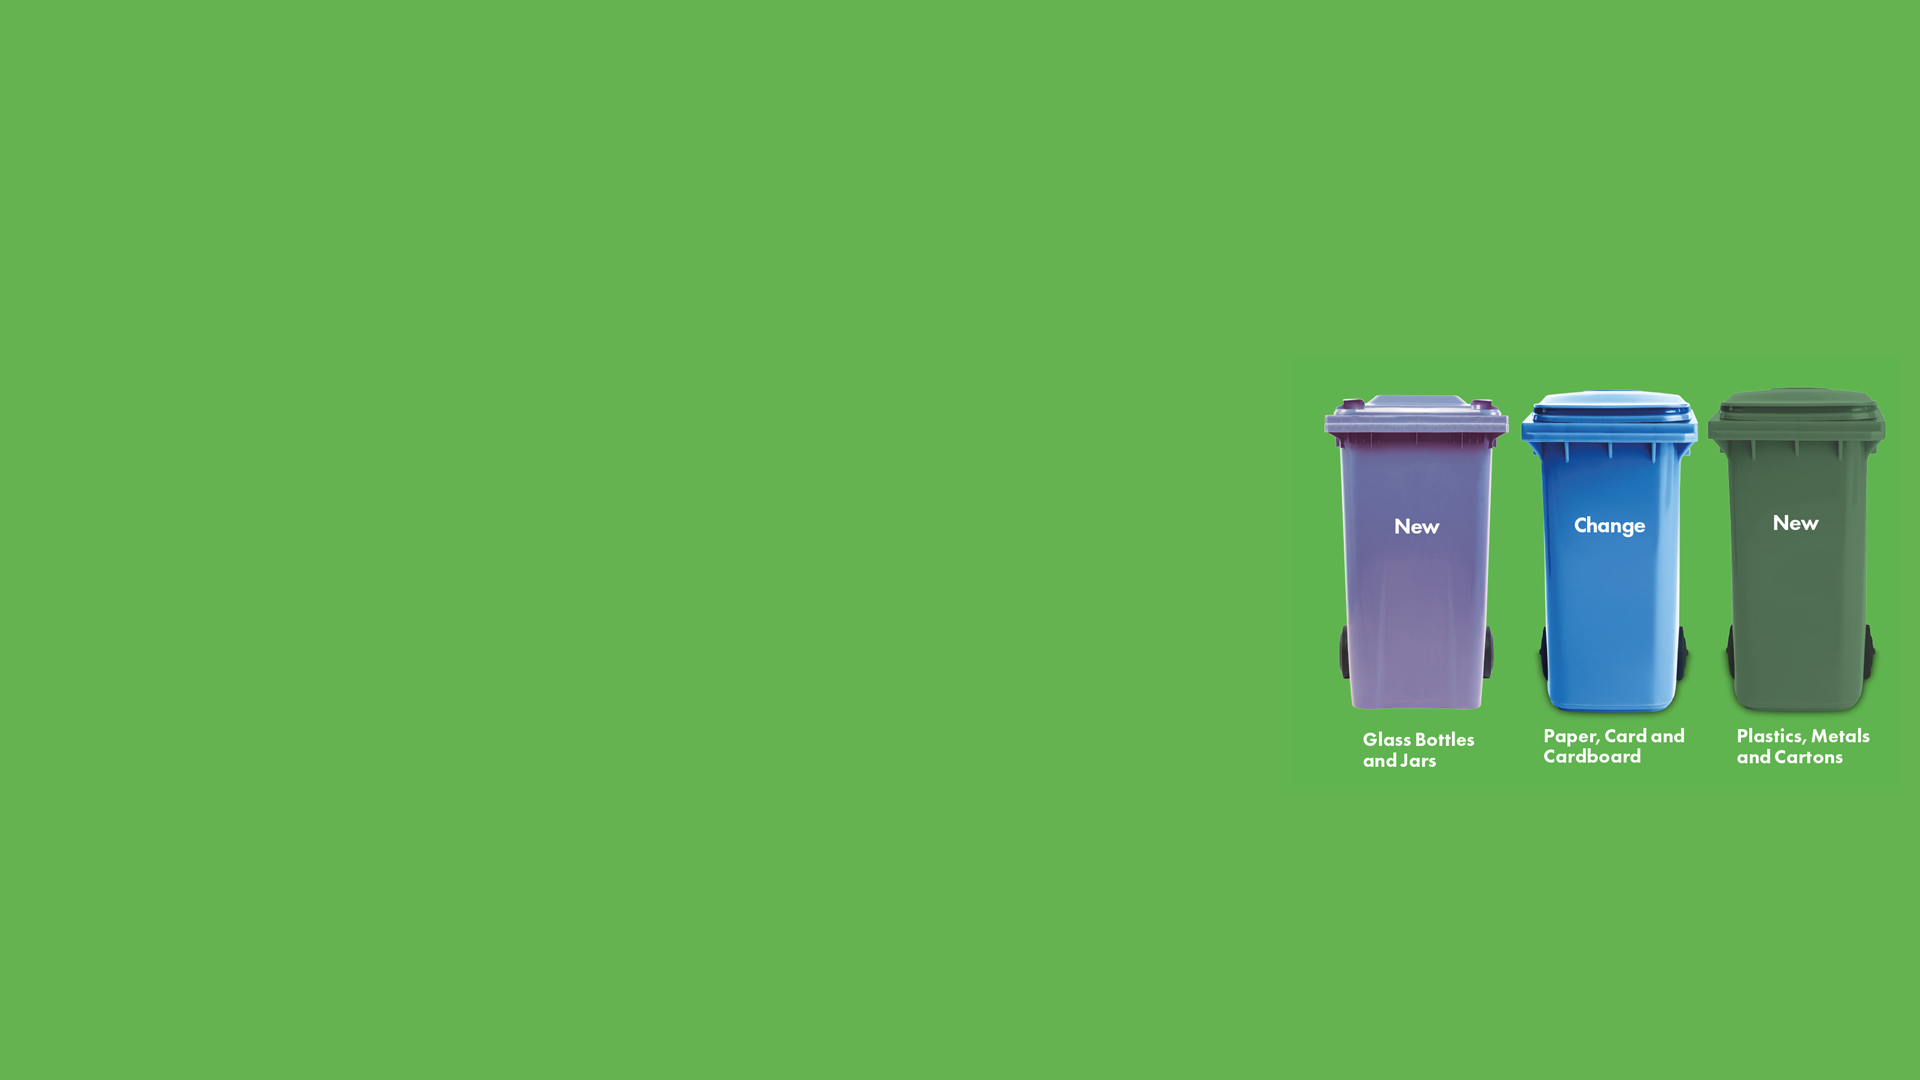 Green rectangle with different wheelie bins demonstrating a change in service